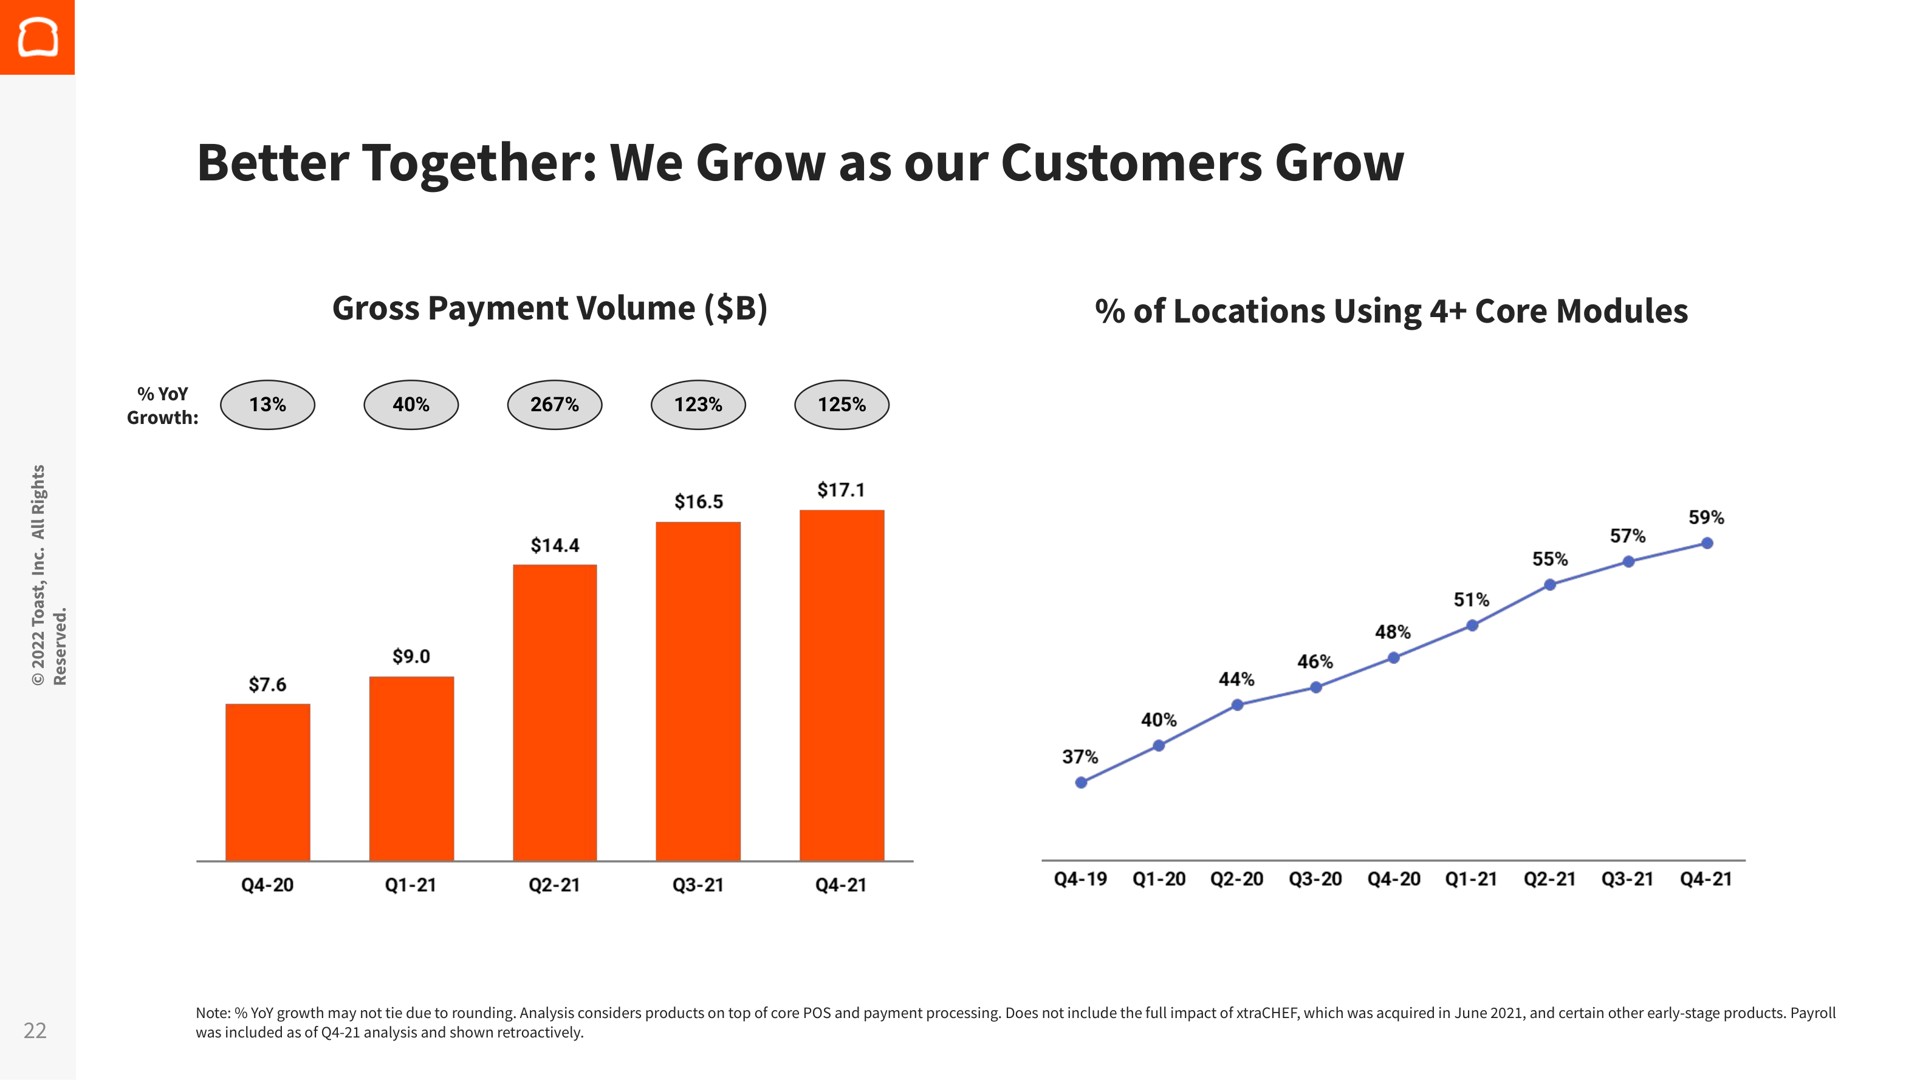 better together we grow as our customers grow | Toast